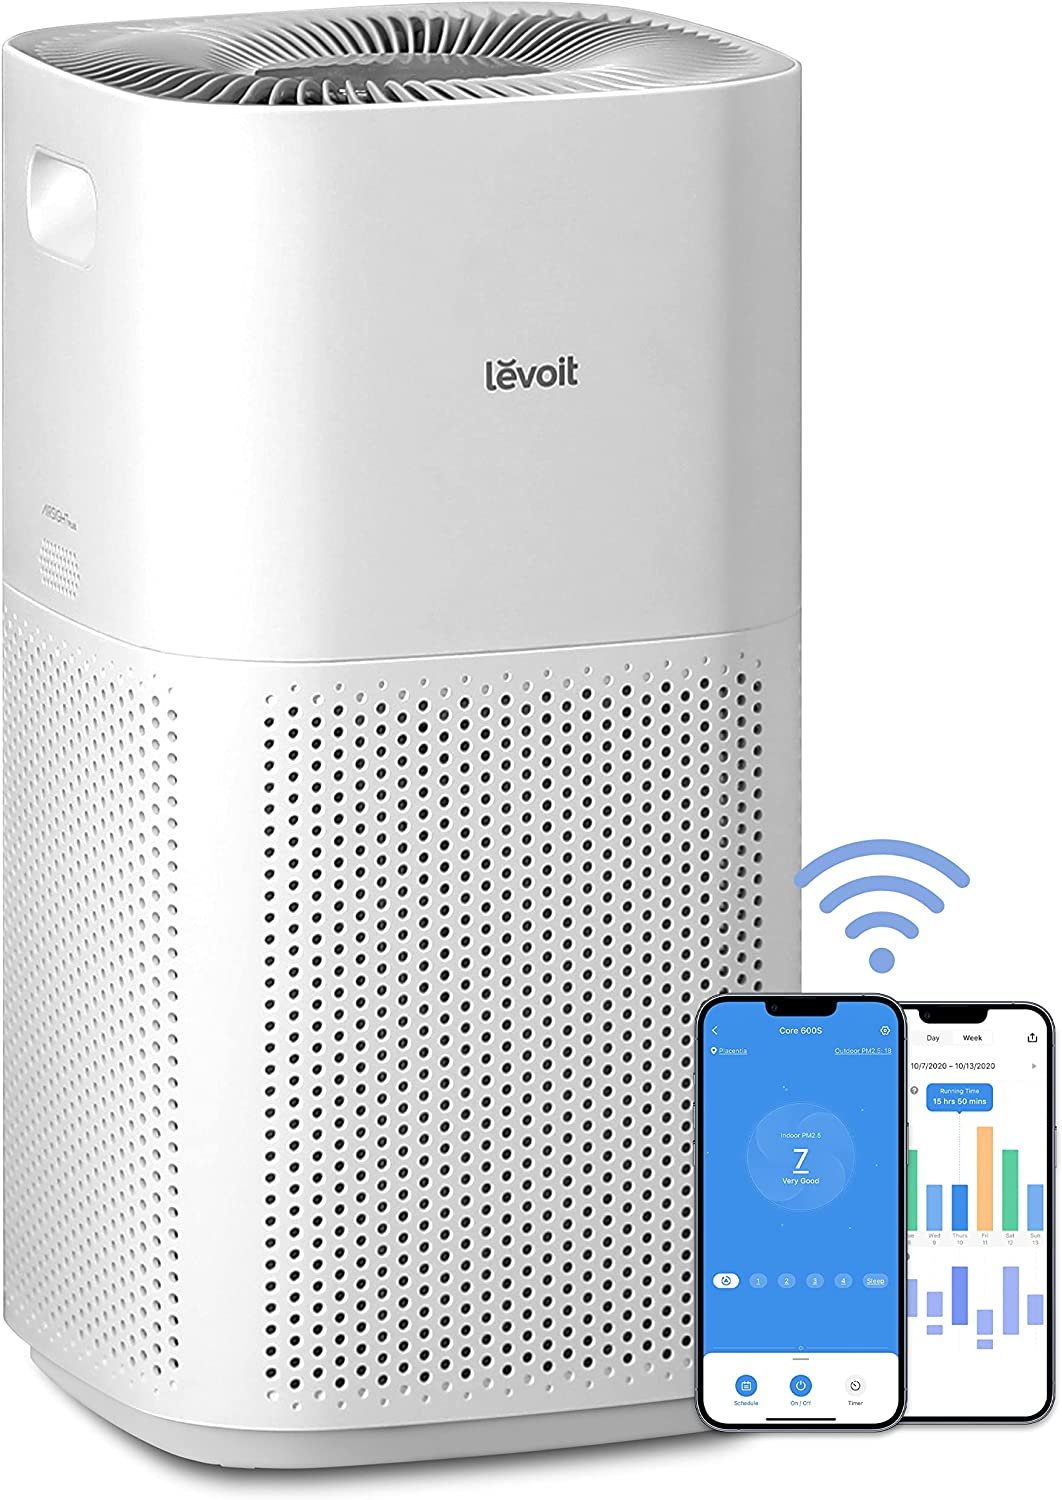 LEVOIT Air Purifiers for Home Large Room, Covers Up to 3175 Sq. Ft, Smart WiFi and PM2.5 Monitor, Hepa Filter Captures Particles, Smoke, Pet Allergies